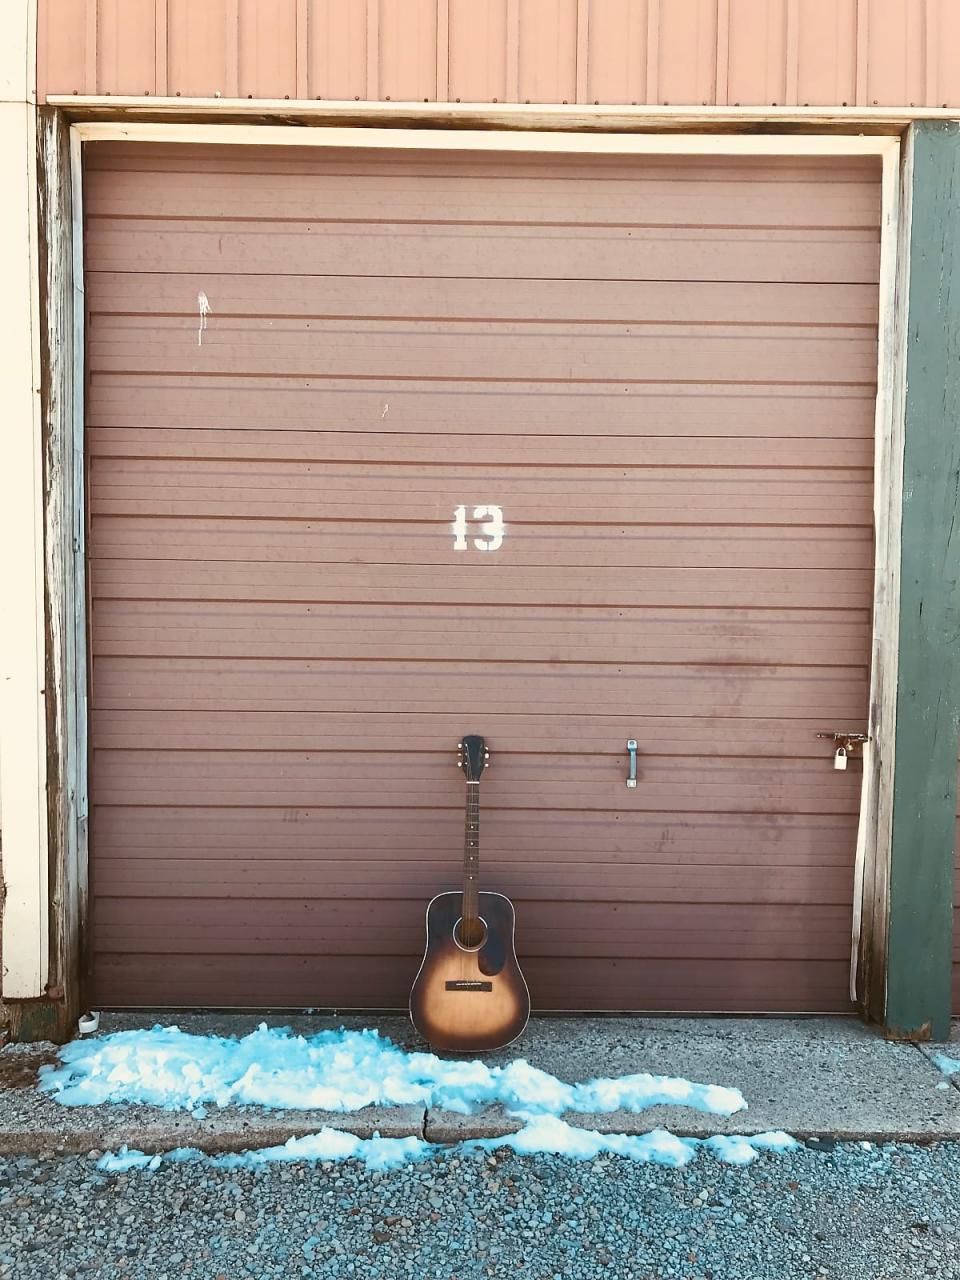 An acoustic guitar sits against a storage door with the number 13 on it